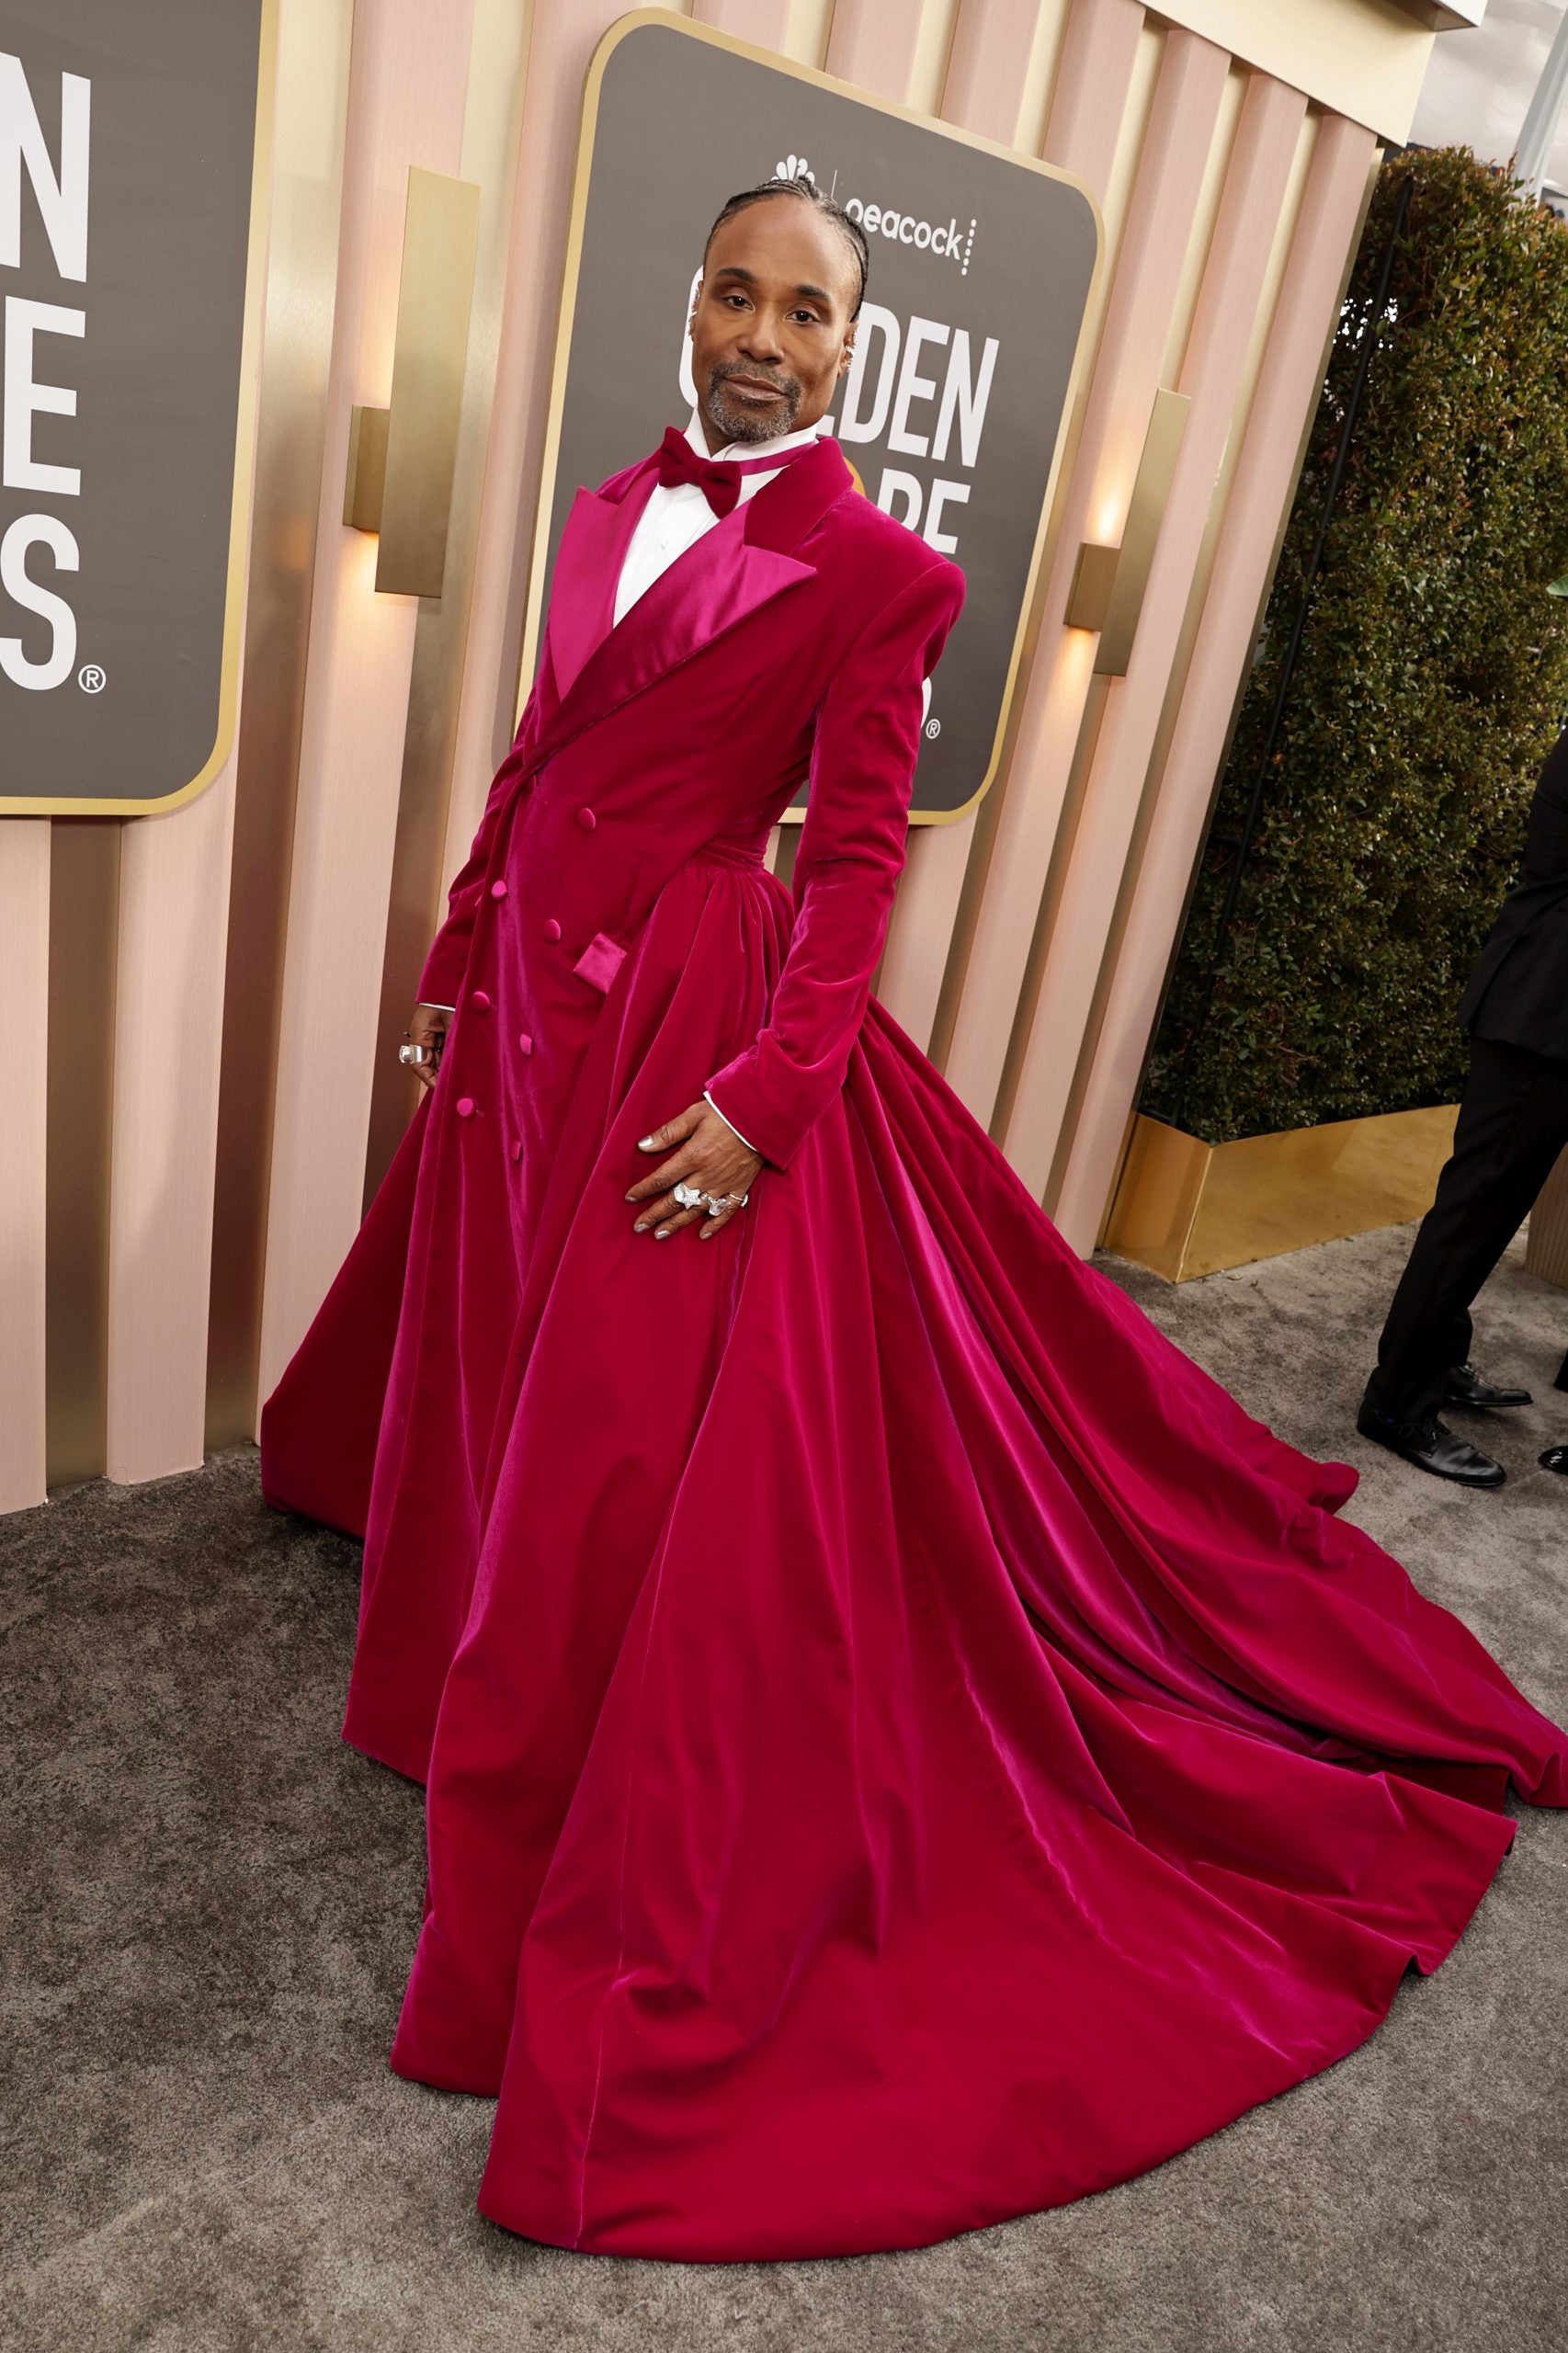 All Of Our Favorite Looks From The 2023 Golden Globes Red Carpet